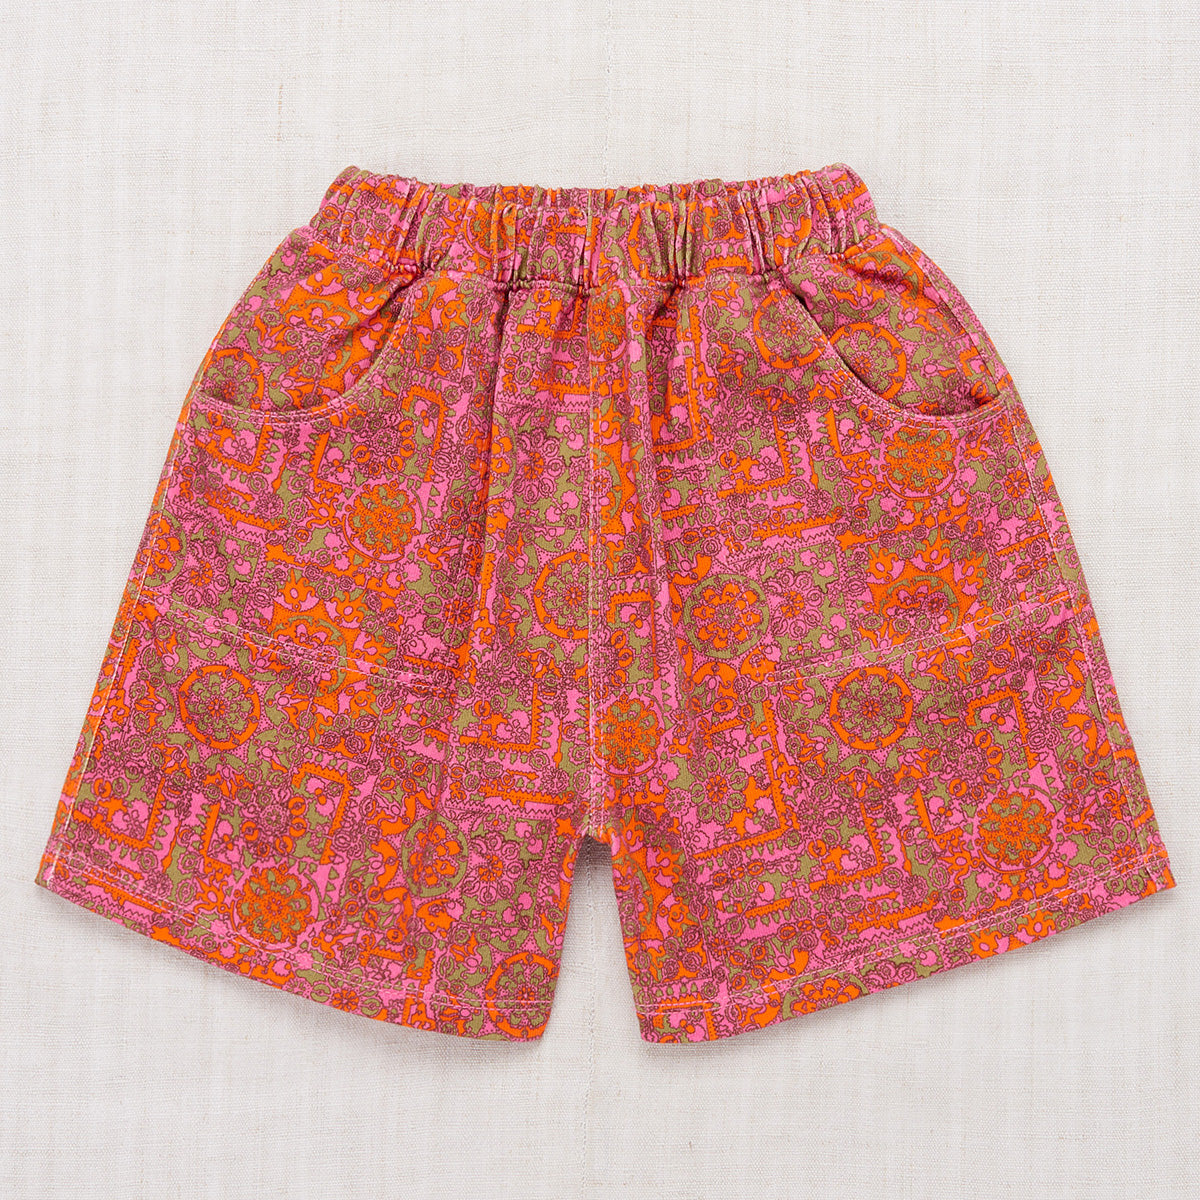 Camp Shorts in Bloom Medallion by Misha & Puff - Last One In Stock